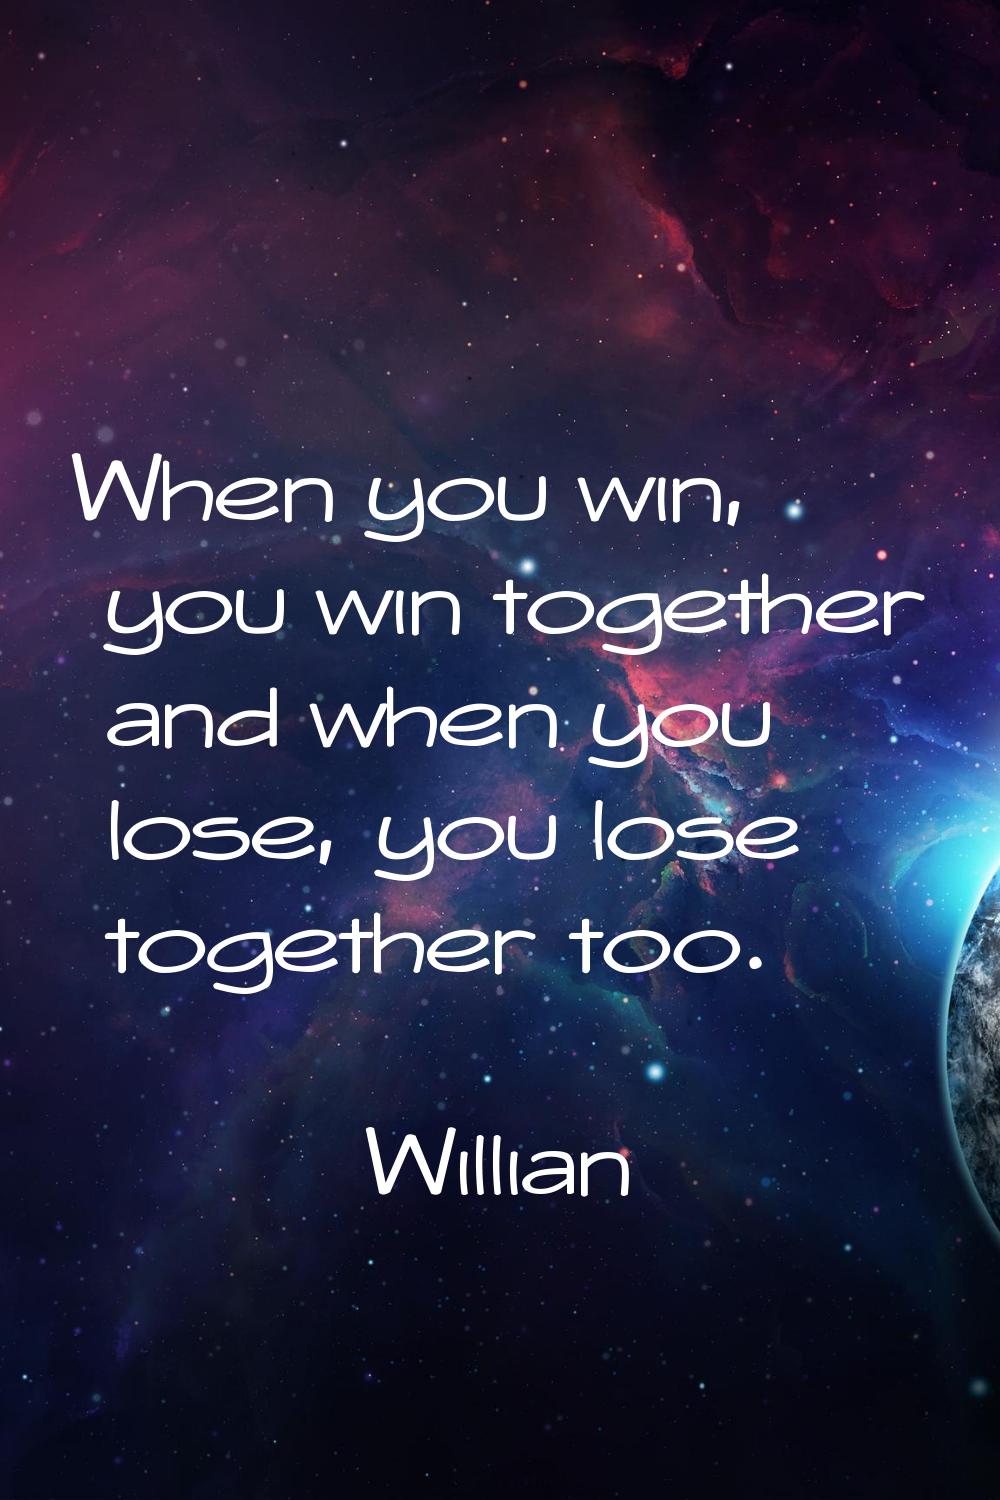 When you win, you win together and when you lose, you lose together too.